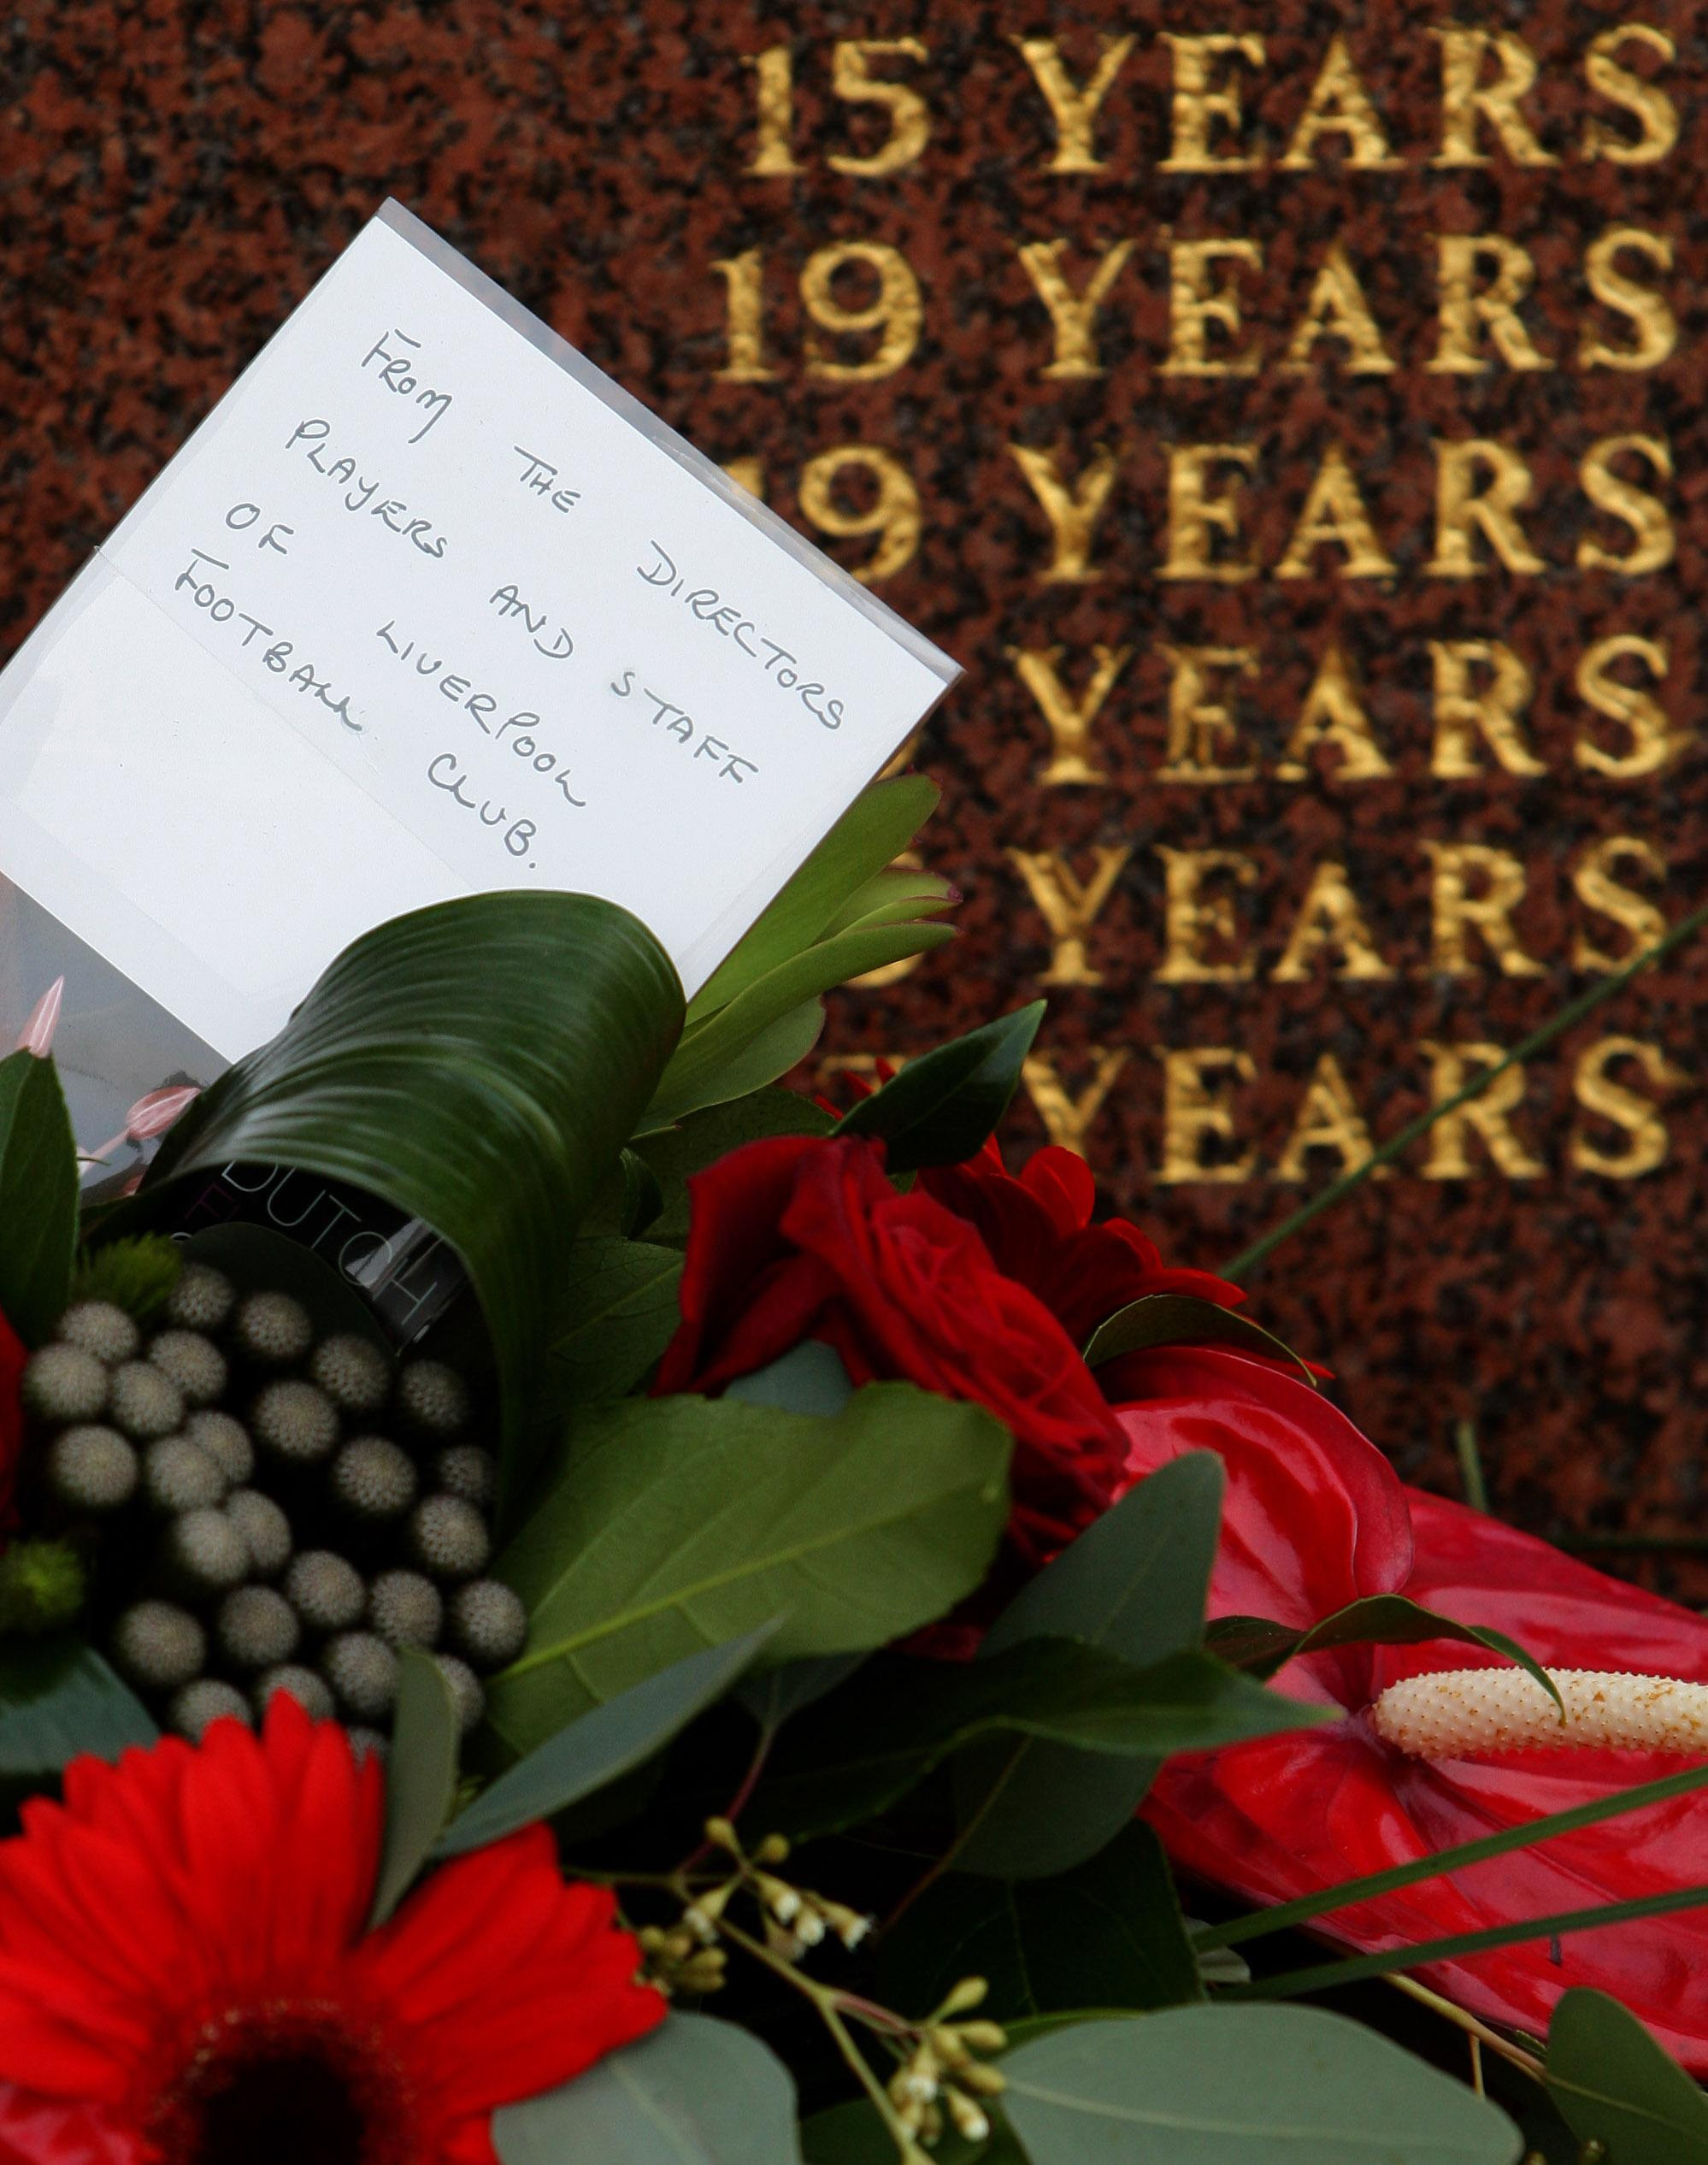 A floral tribute from Liverpool FC sits in front of the Hillsborough Memorial before a memorial service at Liverpool’s Anfield stadium